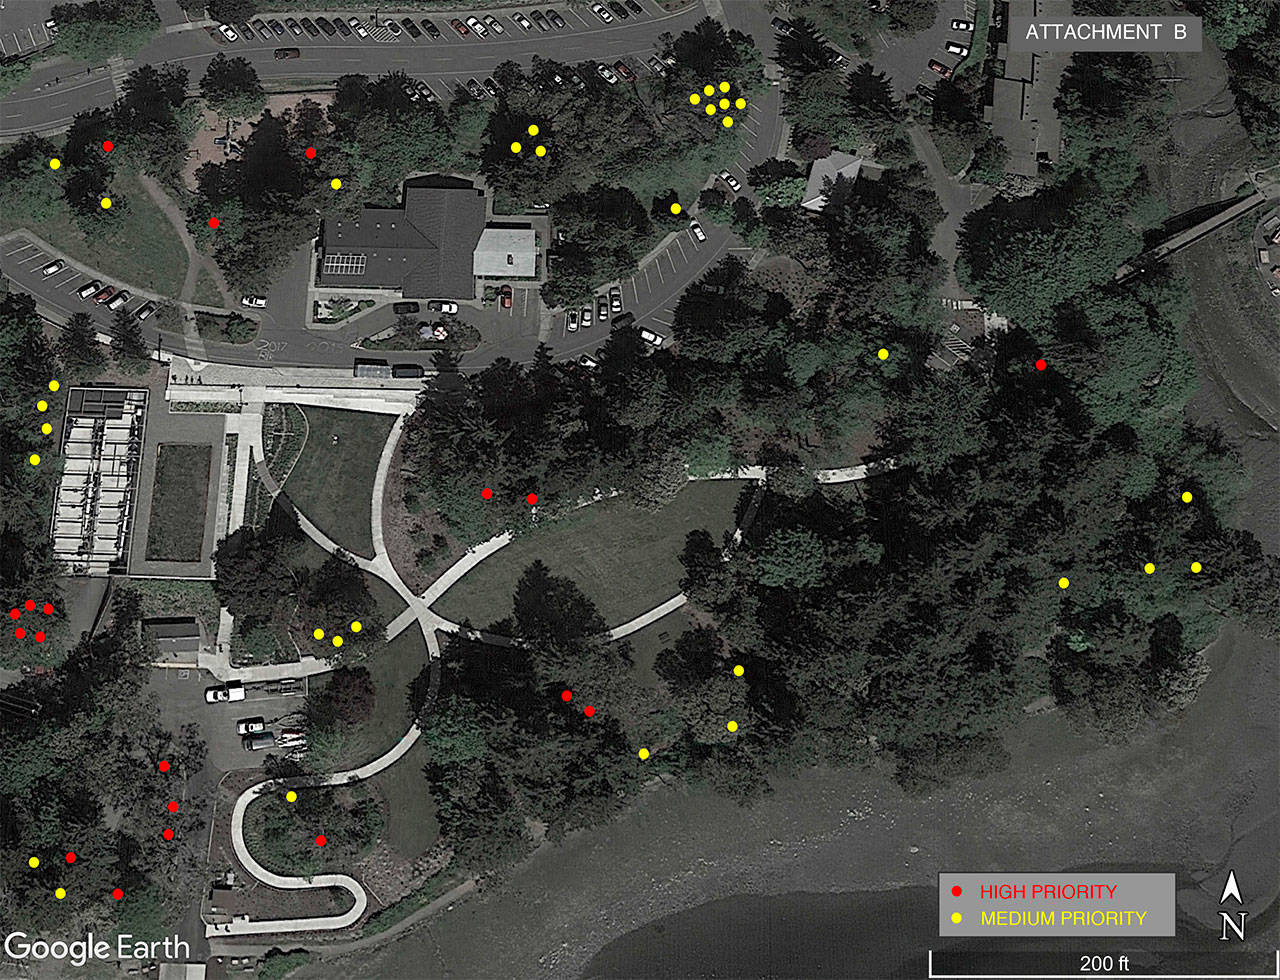 This overview photograph shows trees that have been identified as high priority (in red) “for an intervention,” according to the city, and medium priority (medium priority) trees. (Image courtesy of the city of Bainbridge Island)